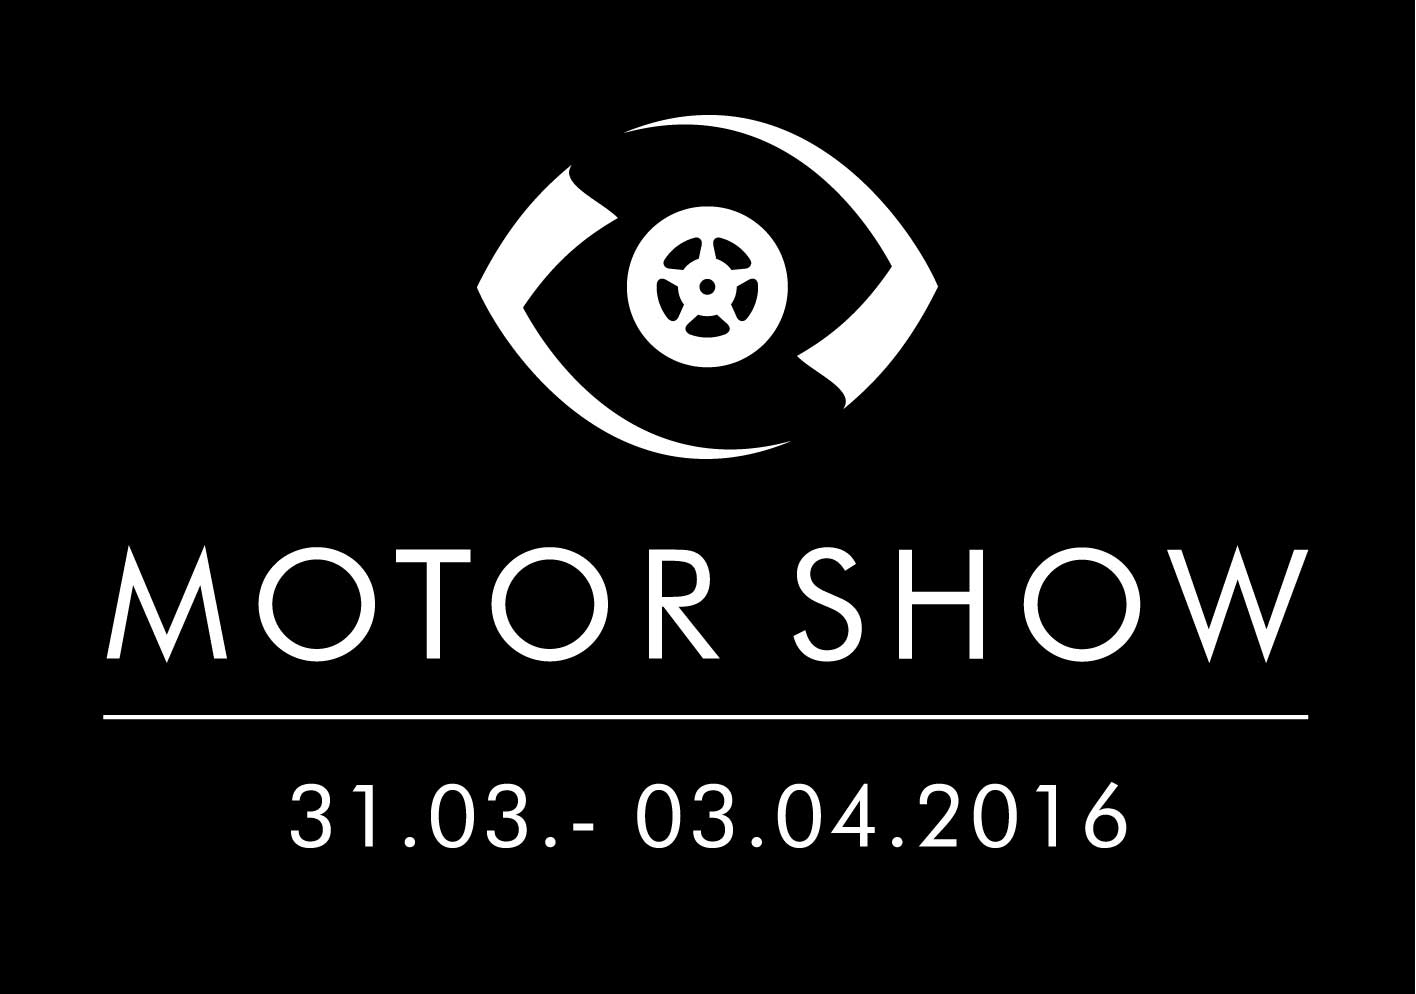 The Motor-Show 2016 trade fair begins on March 31! – main image